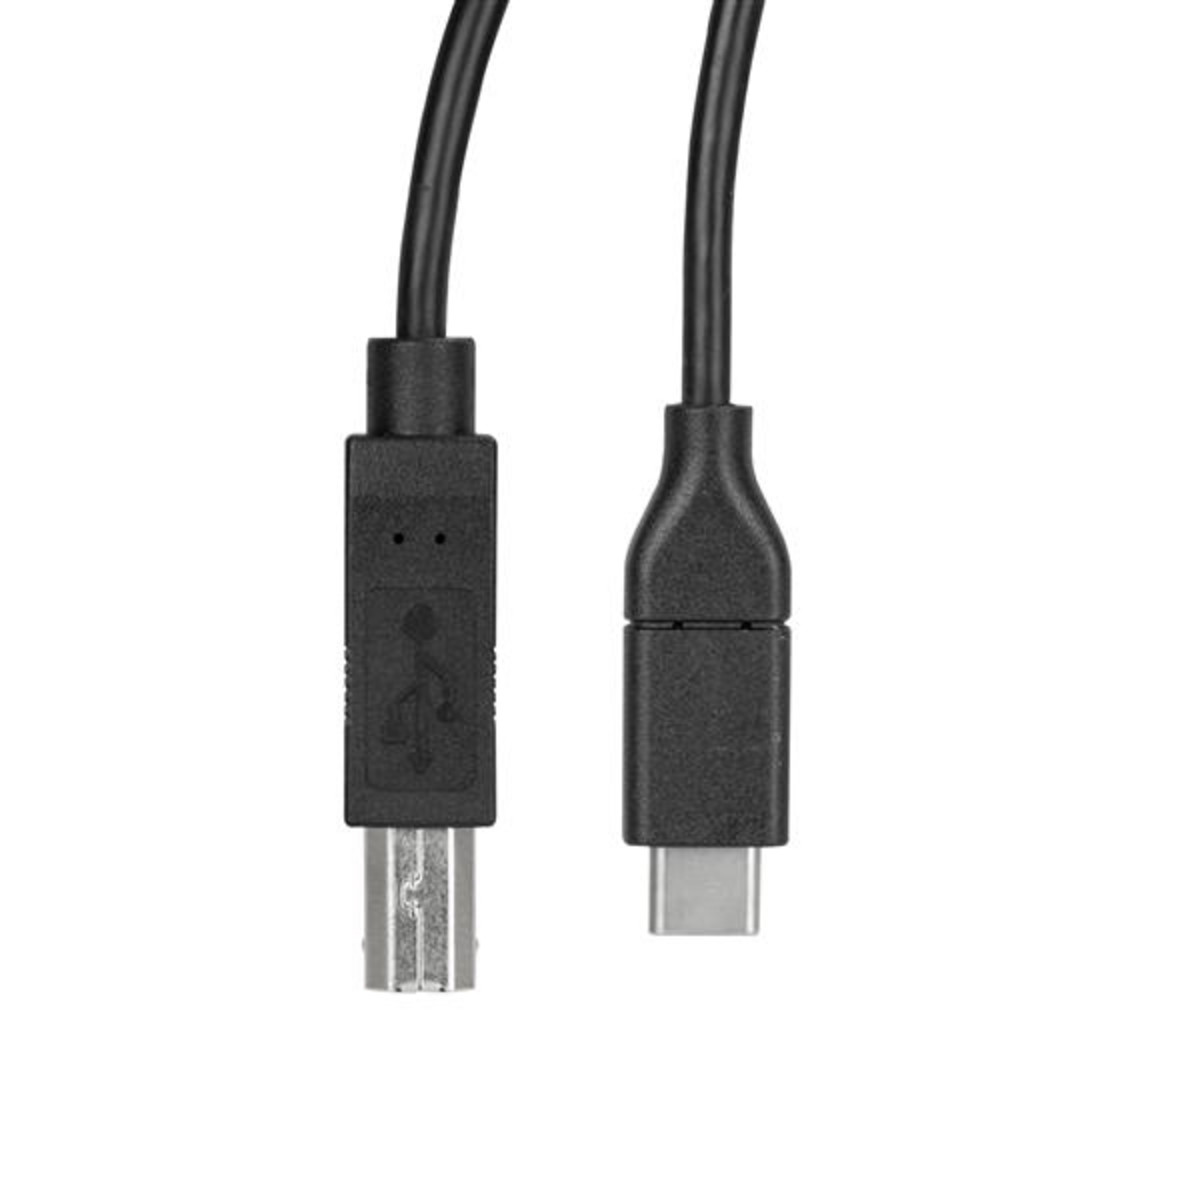 3m 10 ft USB C to USB B Cable - USB 2.0